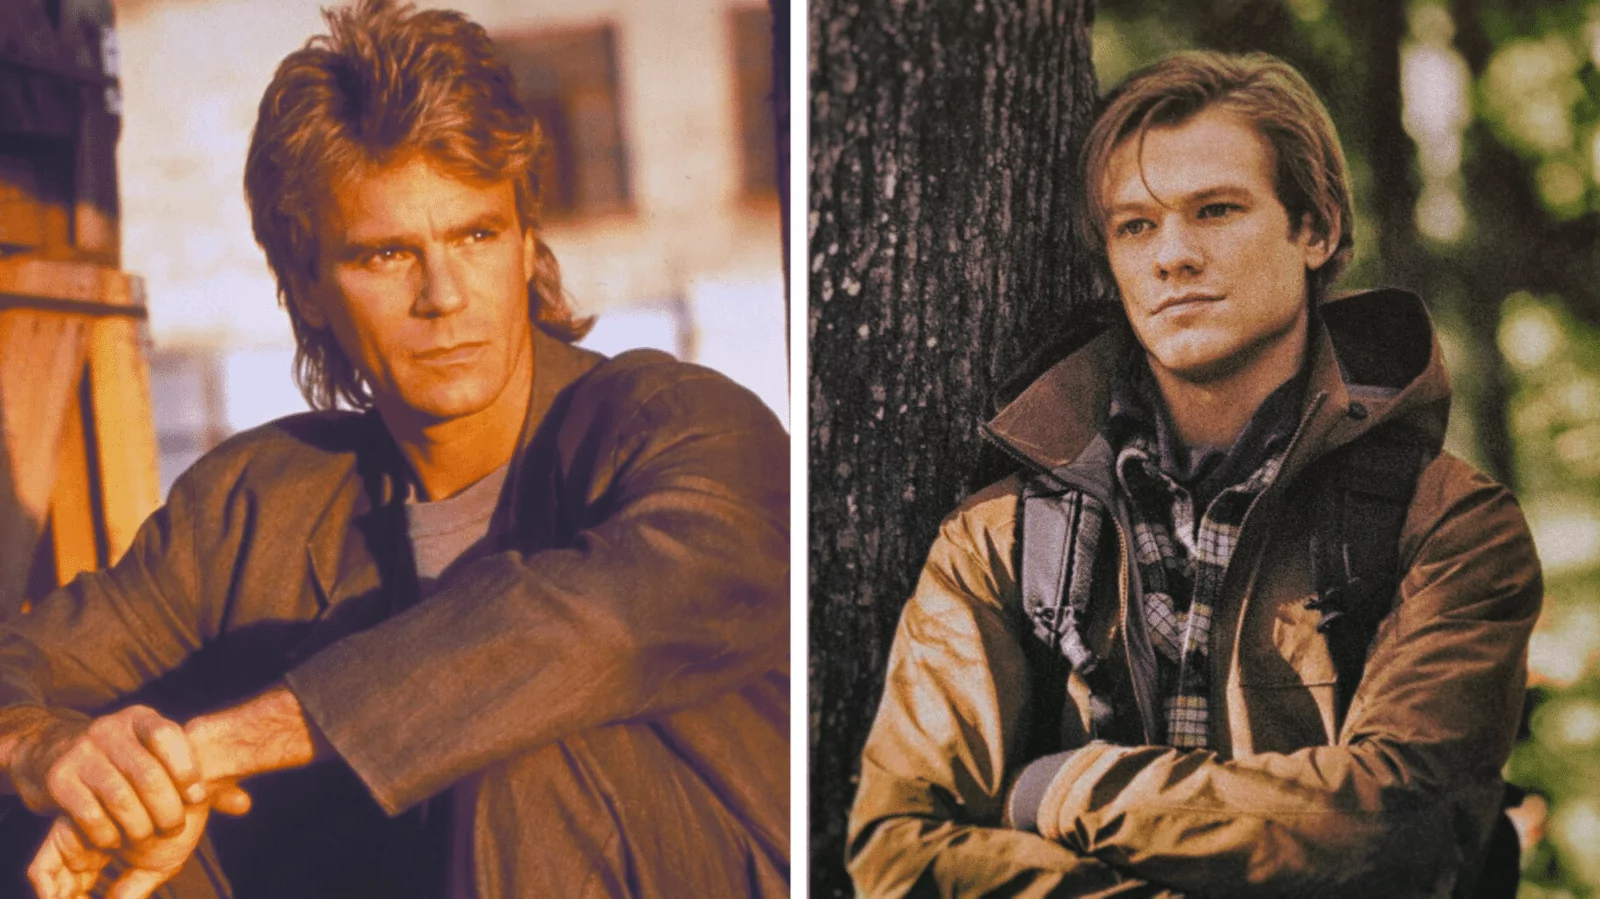 Disability life hacks inspired by the TV show MacGyver. L, original 1980s with mullet, R, 2010s version.